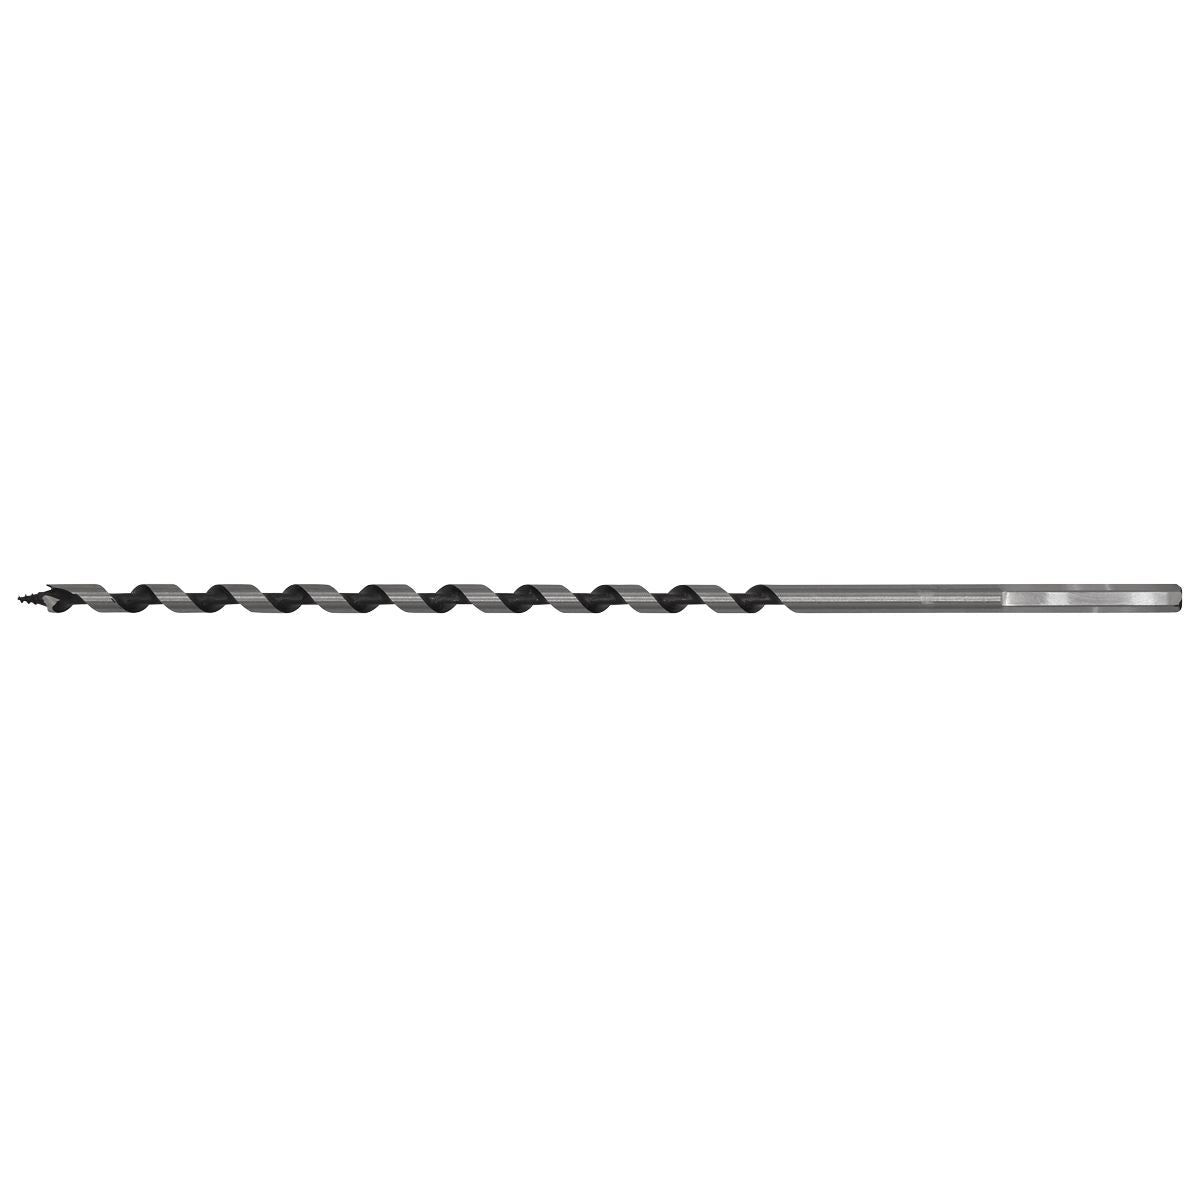 Worksafe by Sealey Auger Wood Drill Bit 6mm x 235mm